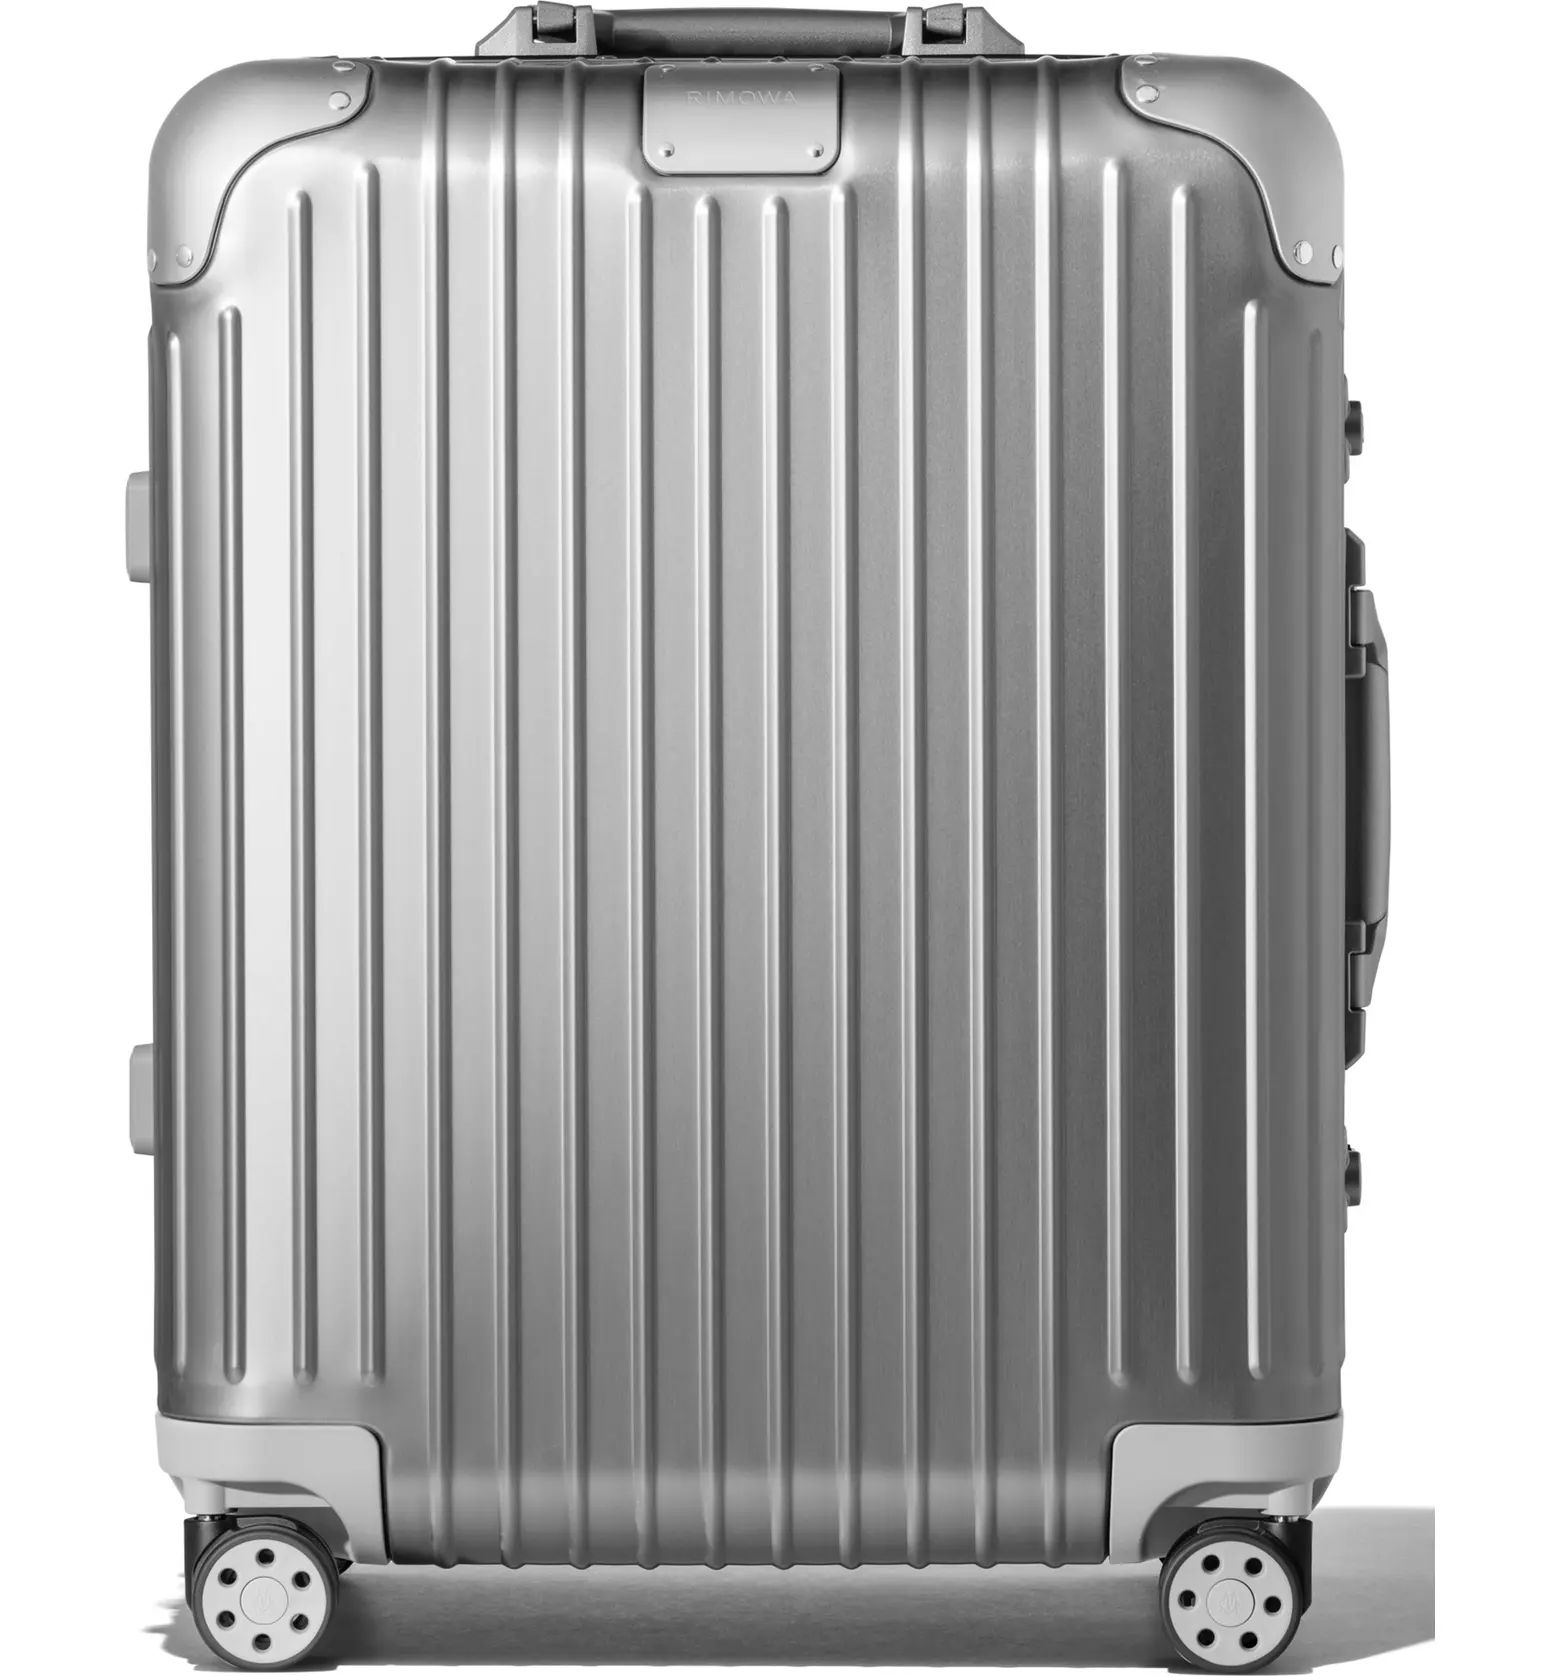 Original Cabin Plus 22-Inch Wheeled Carry-On | Nordstrom